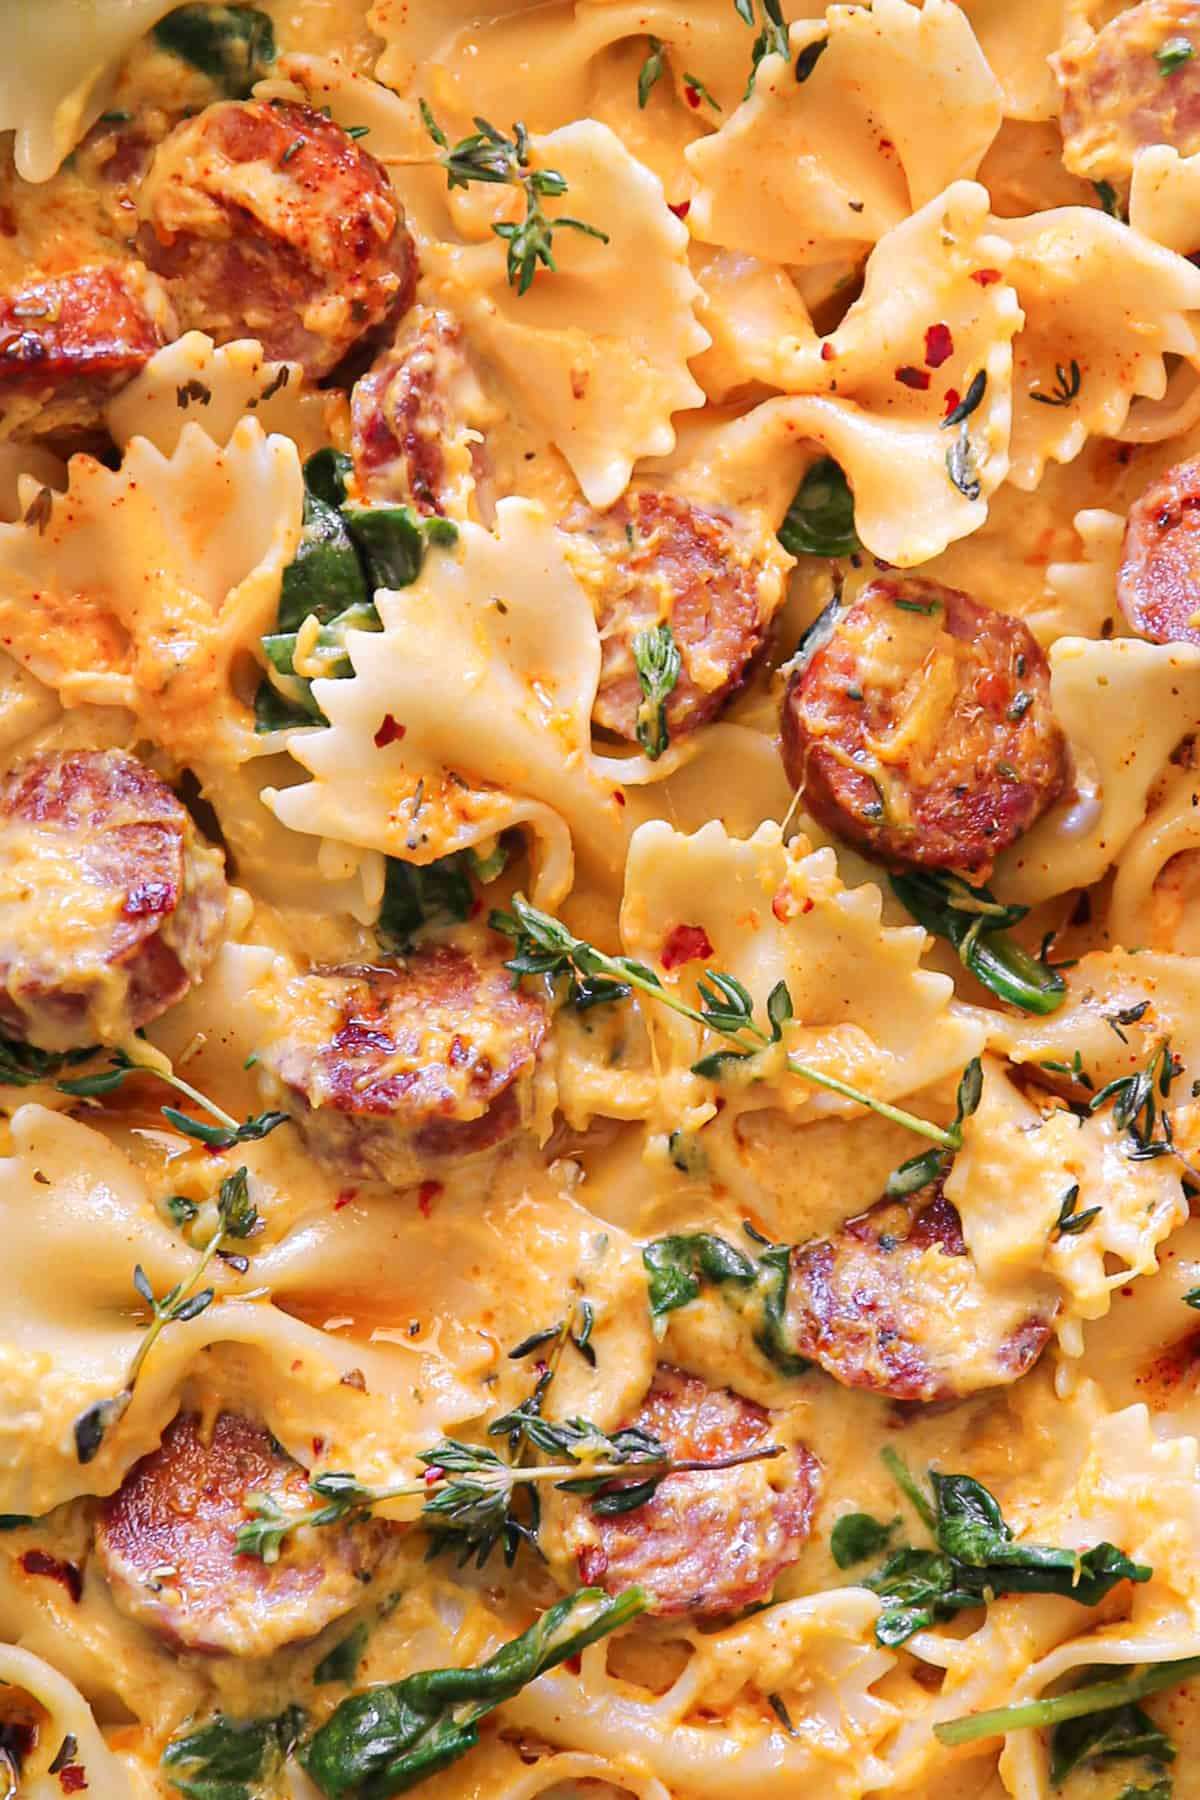 Creamy Acorn Squash Pasta with Sausage and Spinach - close-up photo.